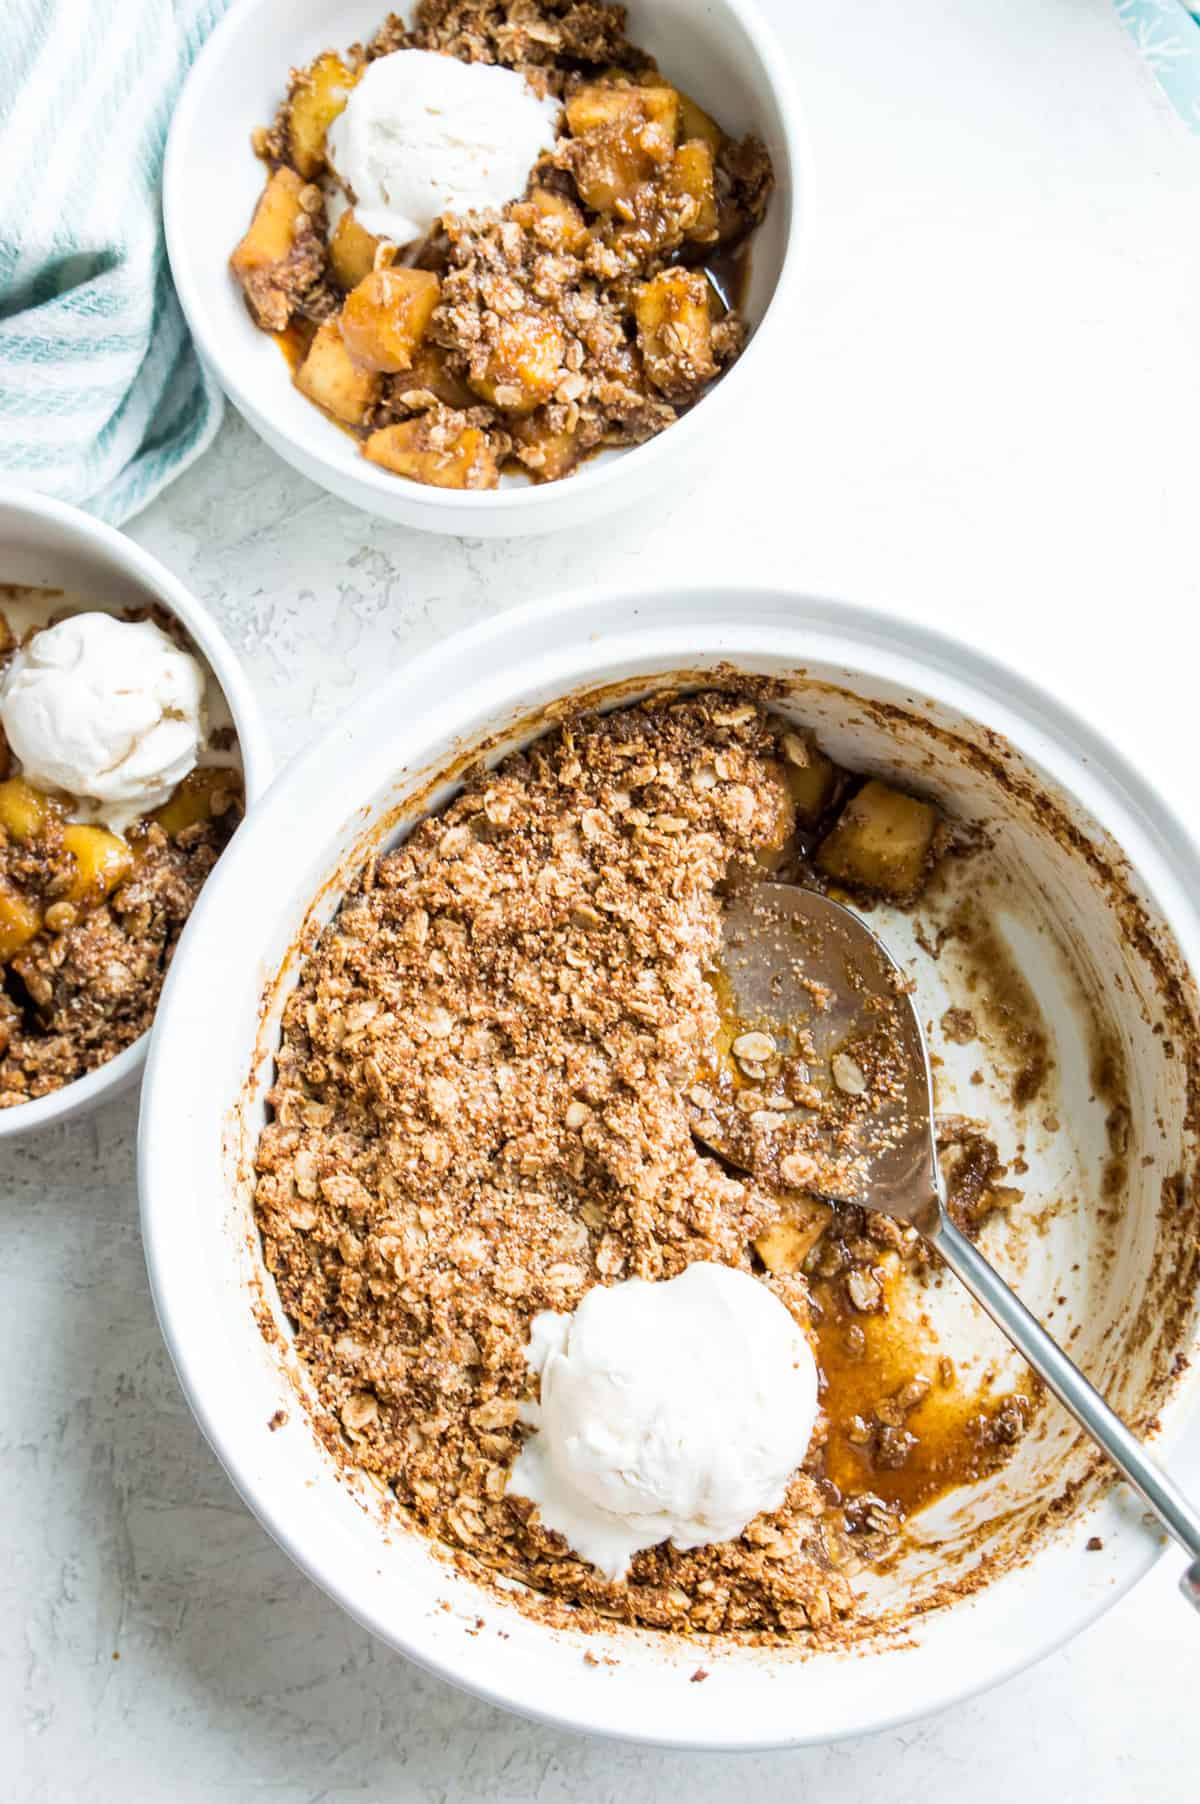 A casserole dish filled with a health apple crumble with ice cream on top and a serving spoon in it.